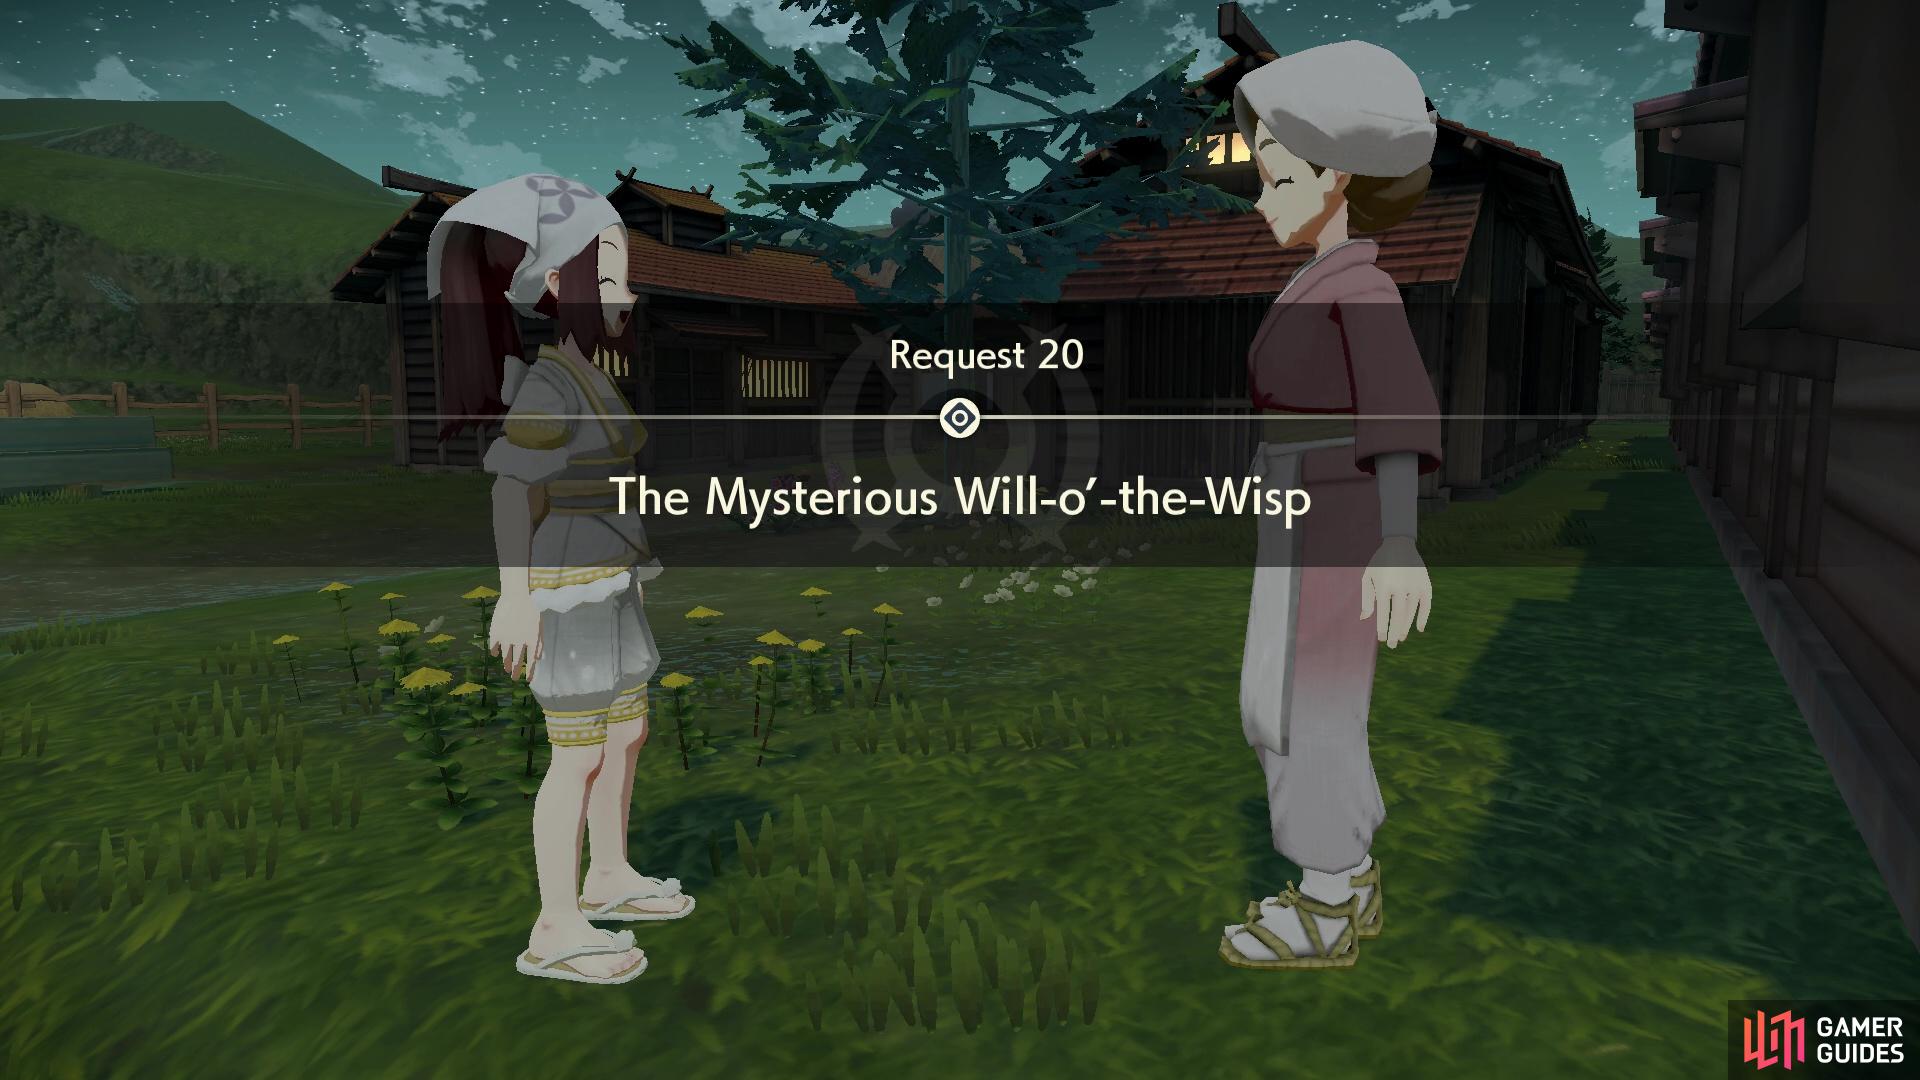 Request 20: The Mysterious Will-o'-the-Wisp.